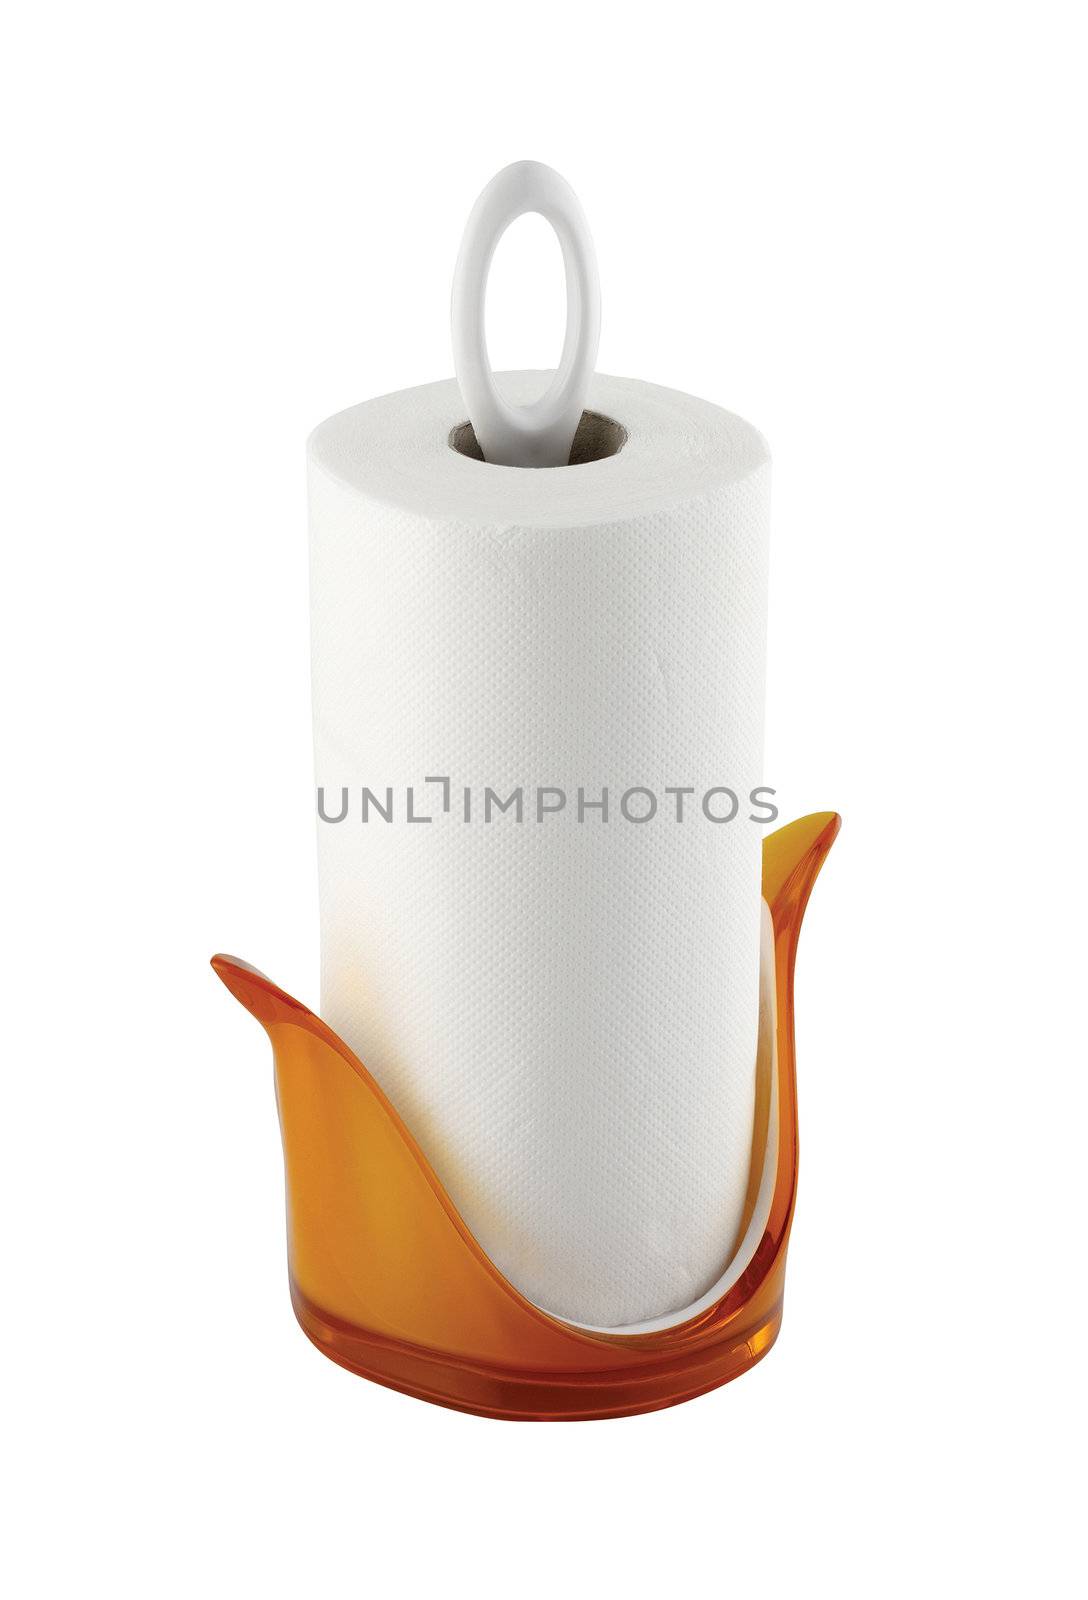 roll of paper towels, isolated on white background
